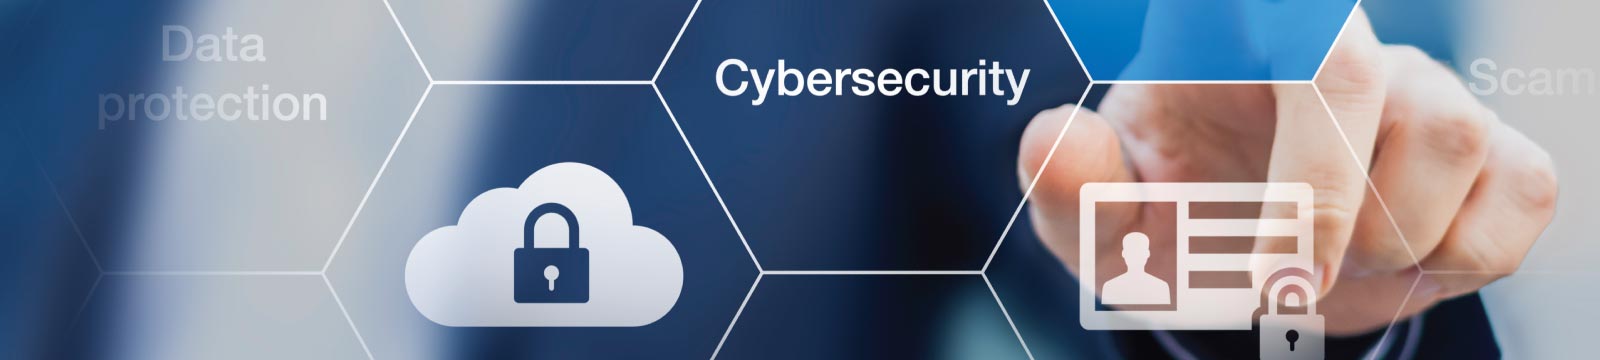 Cybersecurity Symbols and Cloud with a Lock